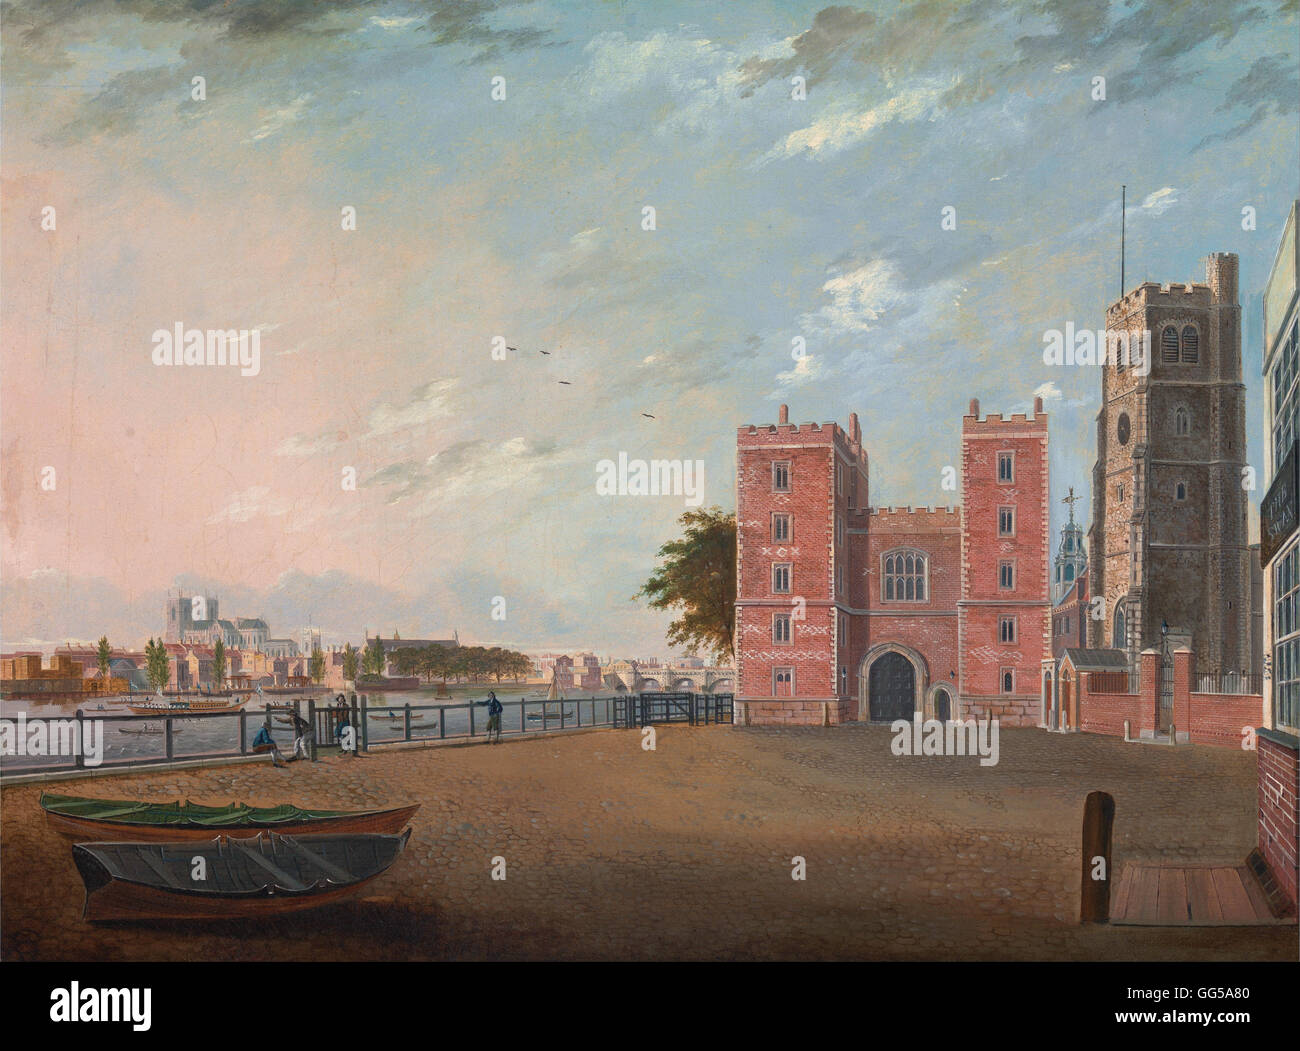 Daniel Turner - Lambeth Palace from the West Stock Photo